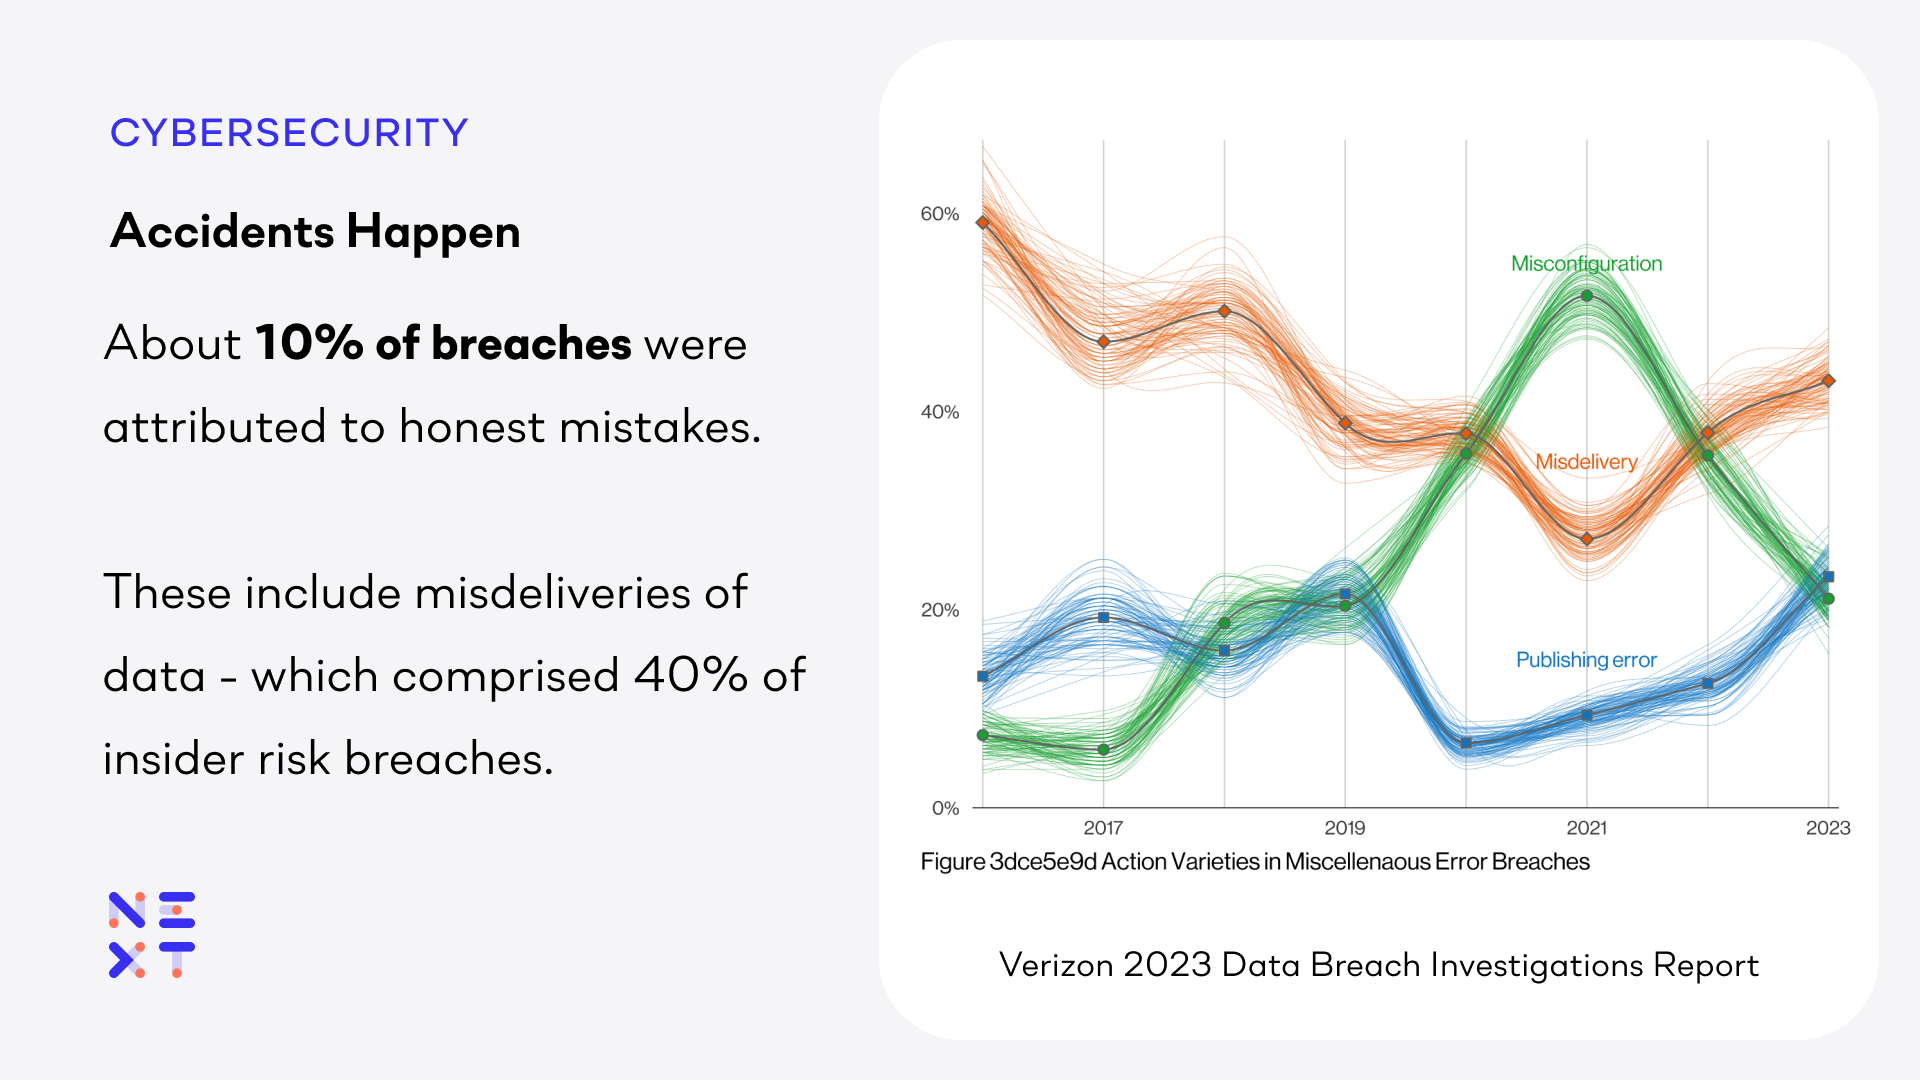 The 2023 Verizon DBIR report says about 10% of insider data breaches are due to mistakes in sending data.